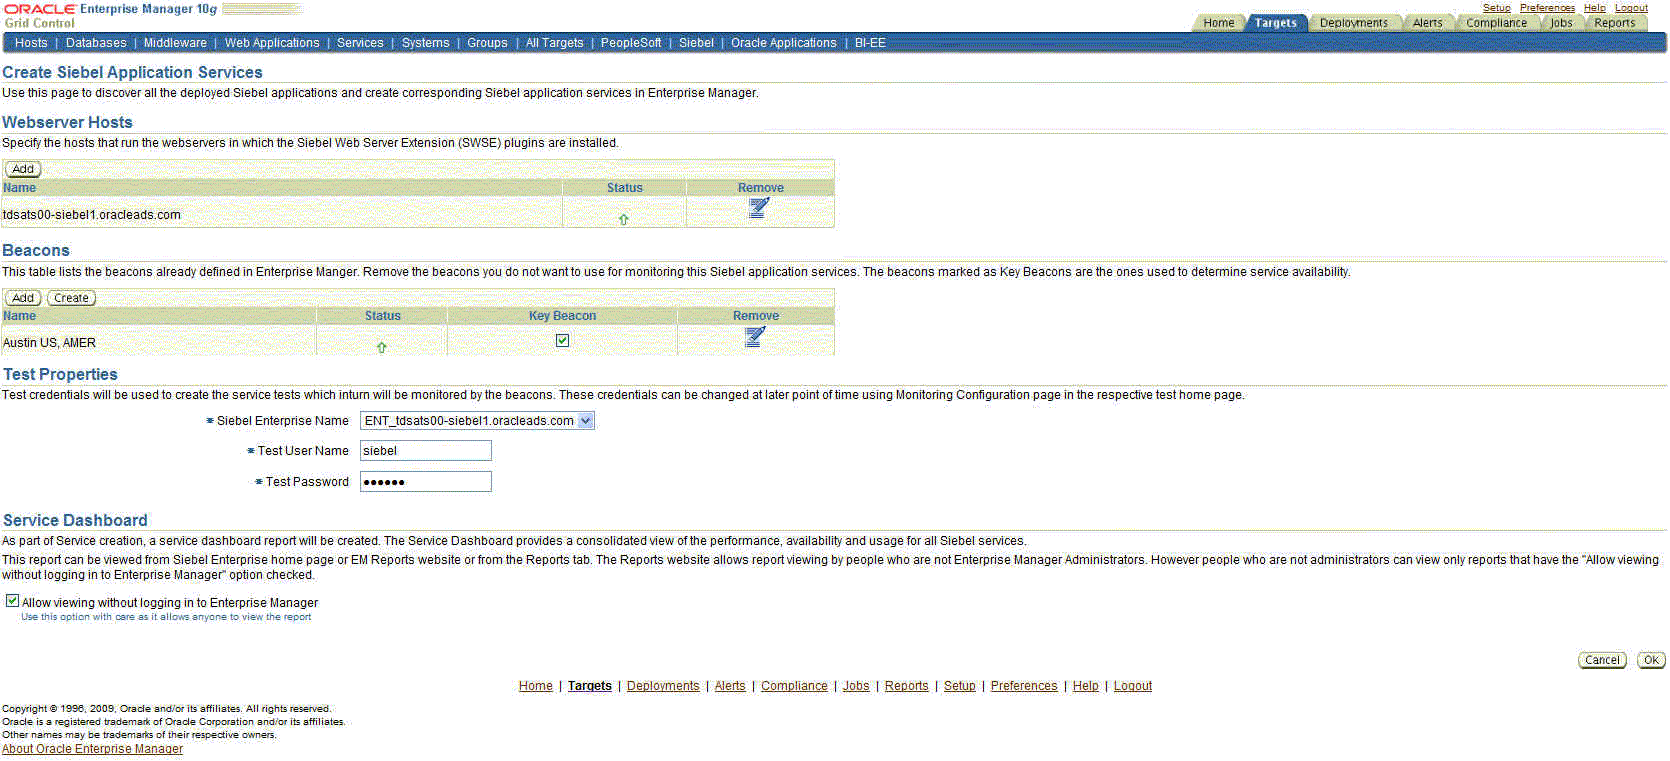 Shows sample data for Create Siebel Application Services page.